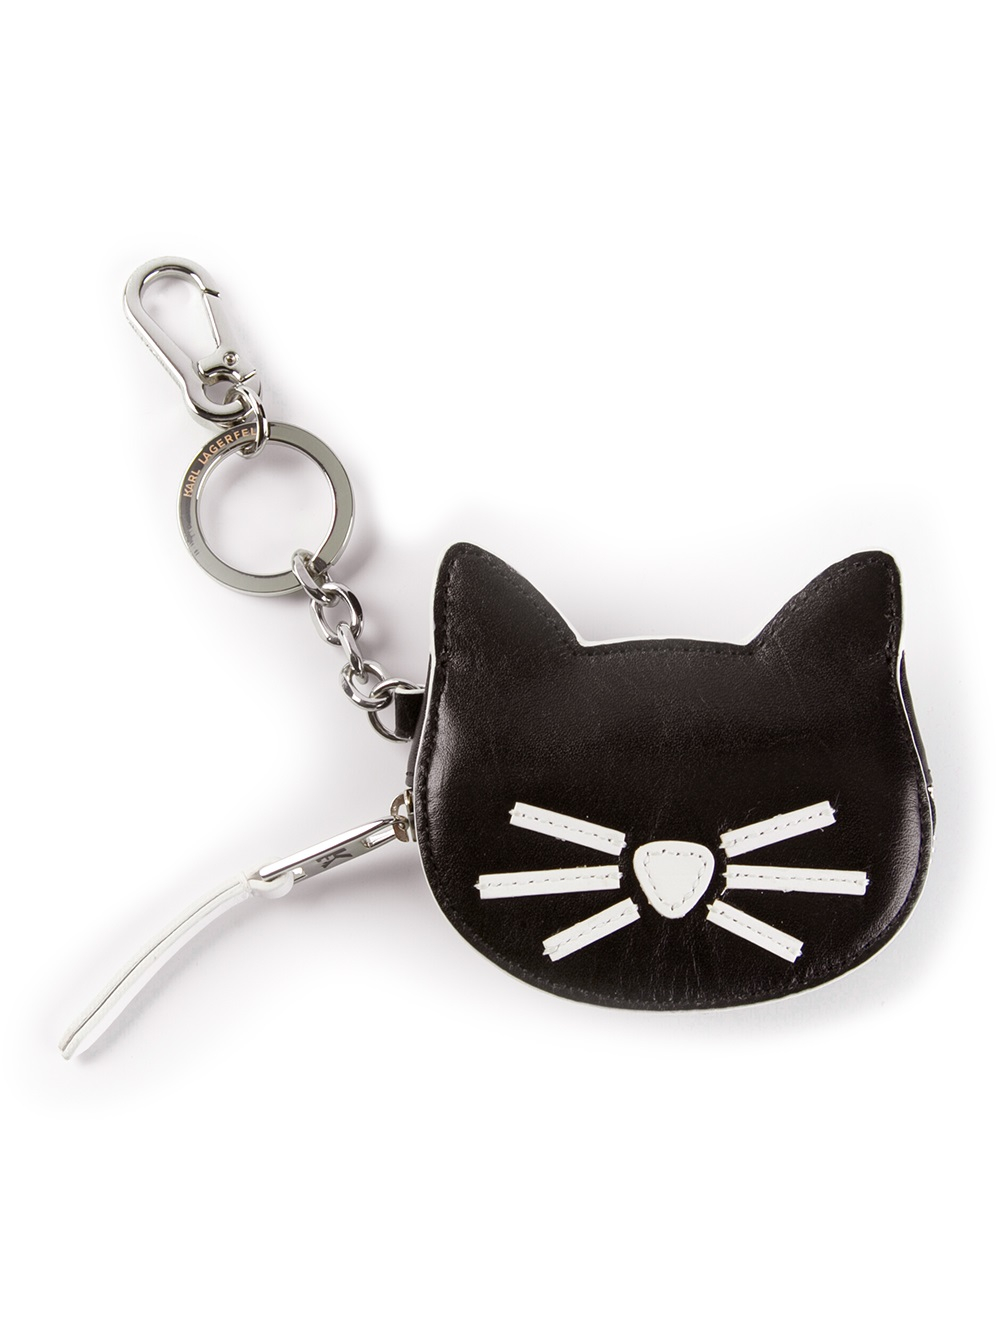 Karl Lagerfeld Cat Shaped Coin Purse in Black - Lyst